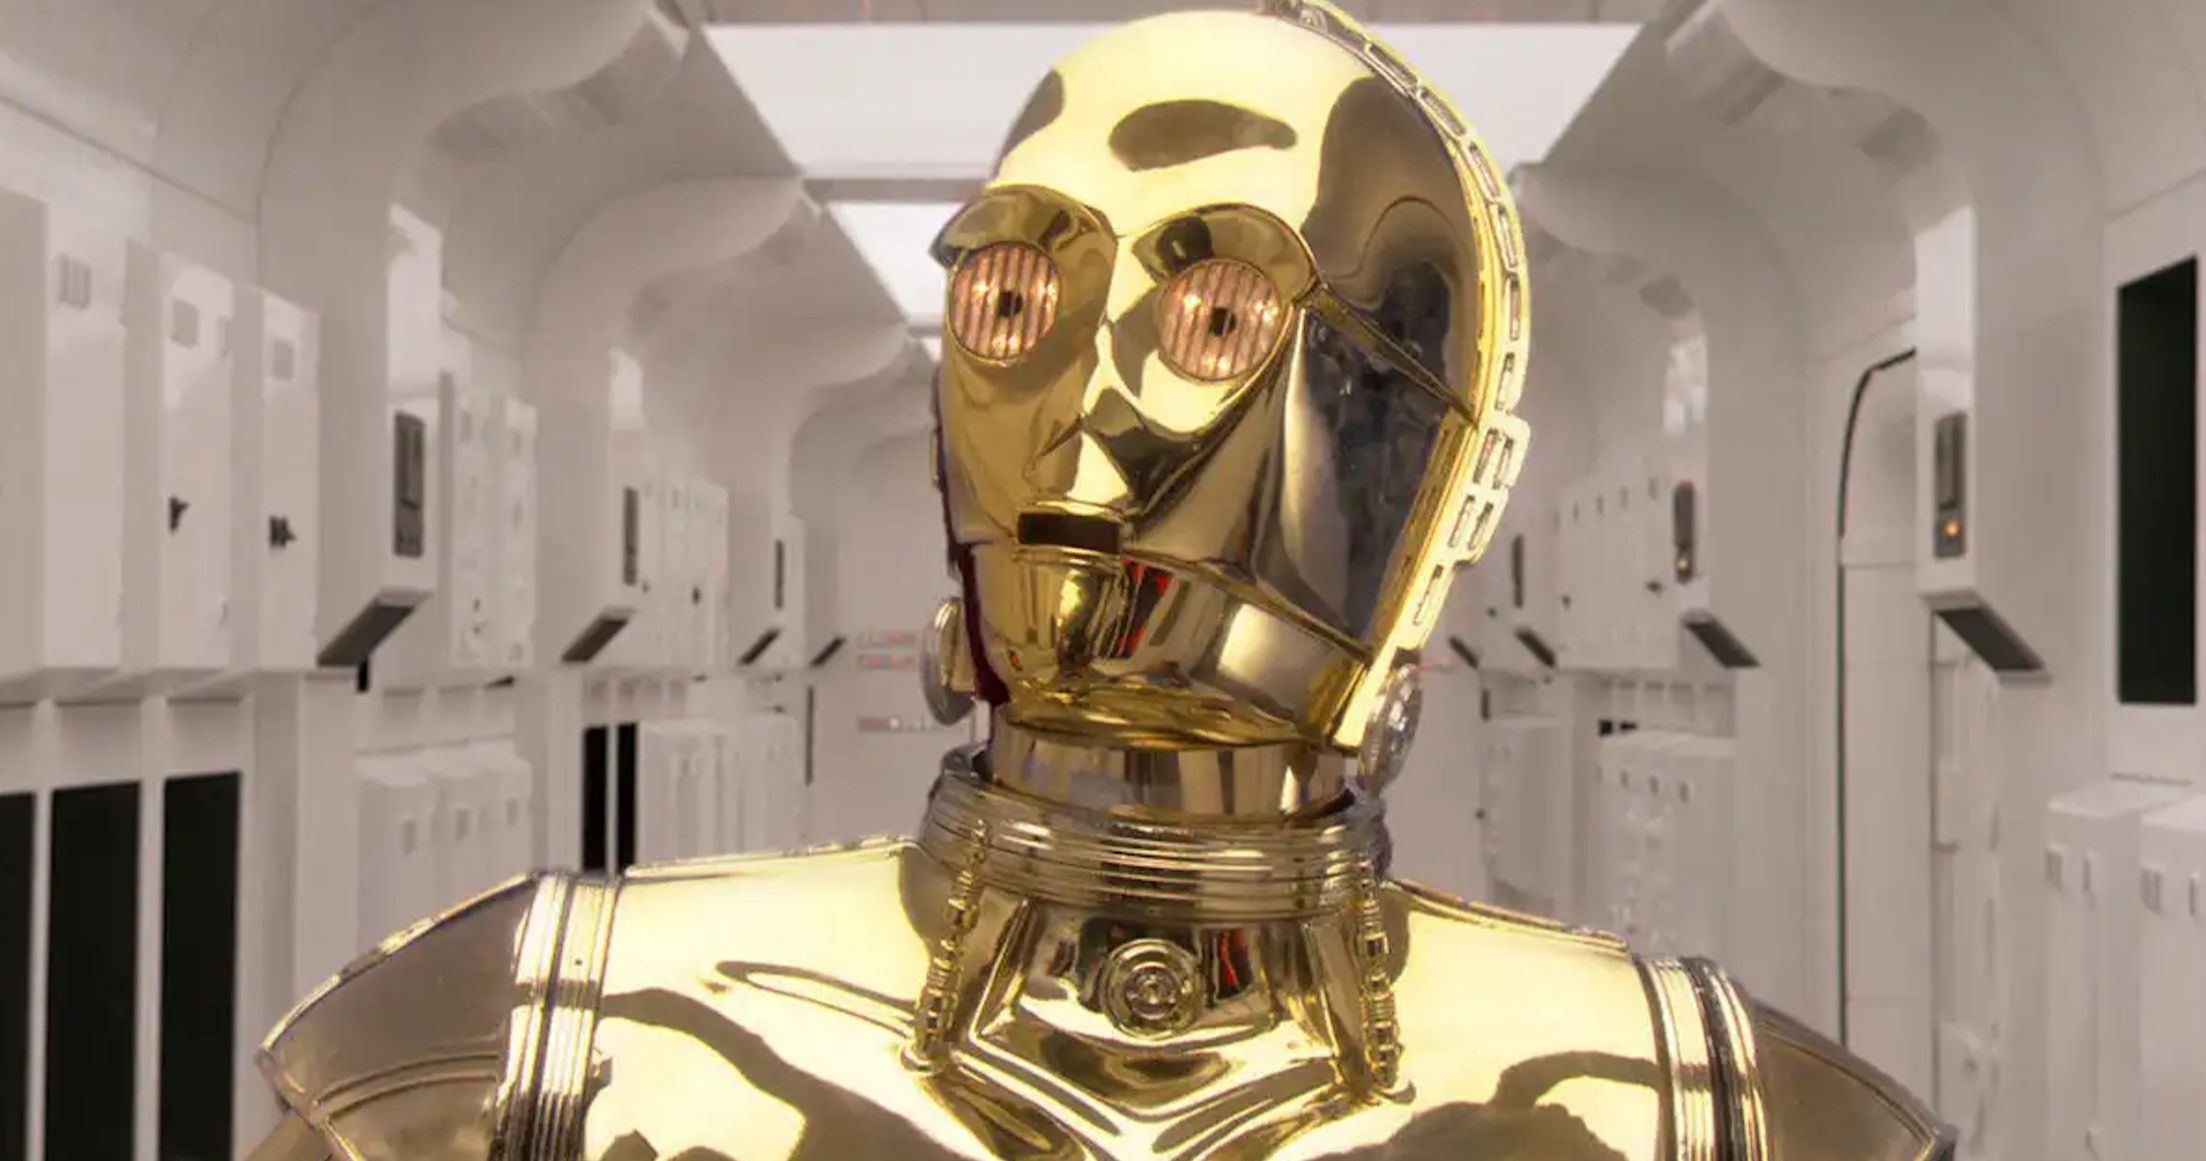 Star Wars Icon Anthony Daniels Celebrates 45 Years of Playing C-3PO